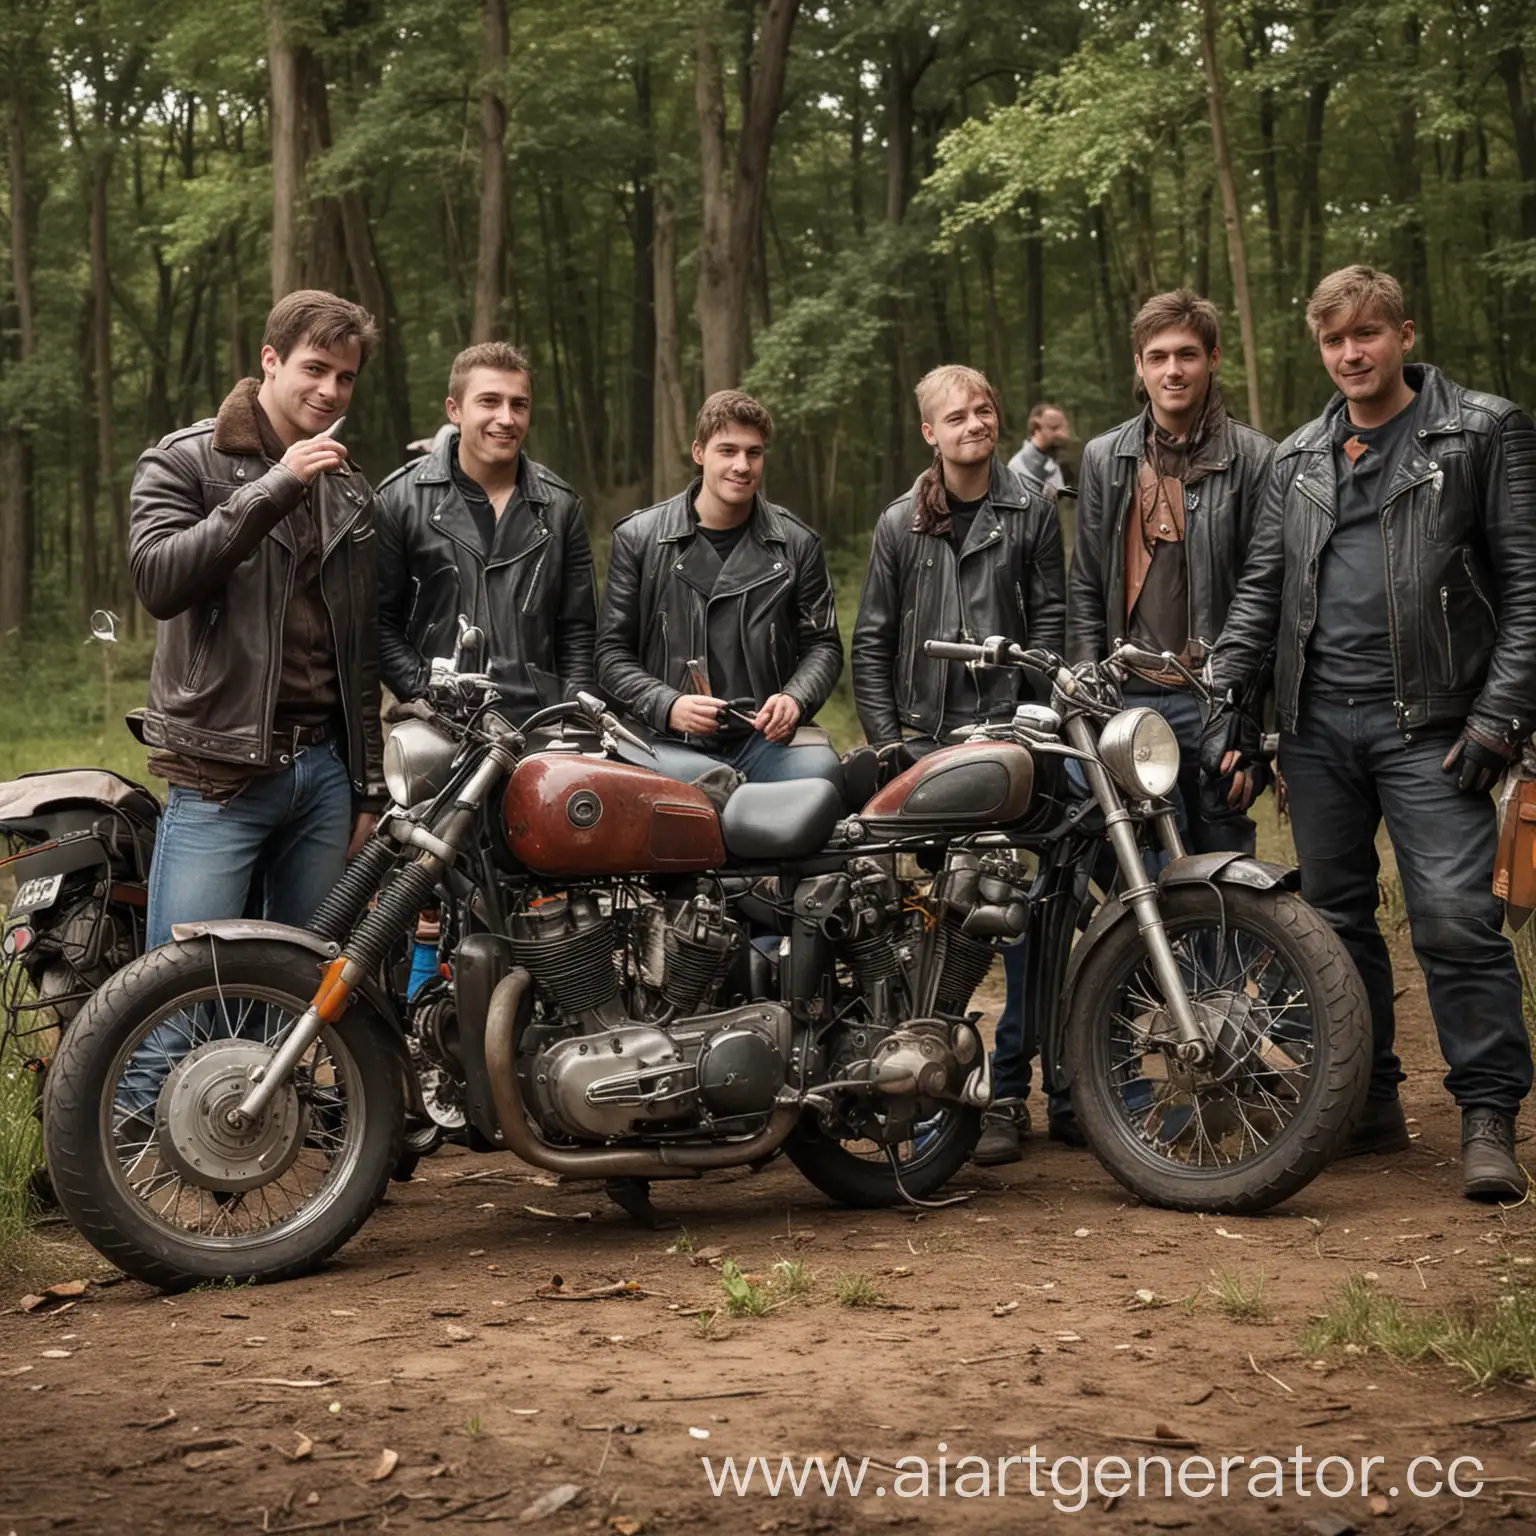 Motorcycle-Adventure-with-Friends-in-Countryside